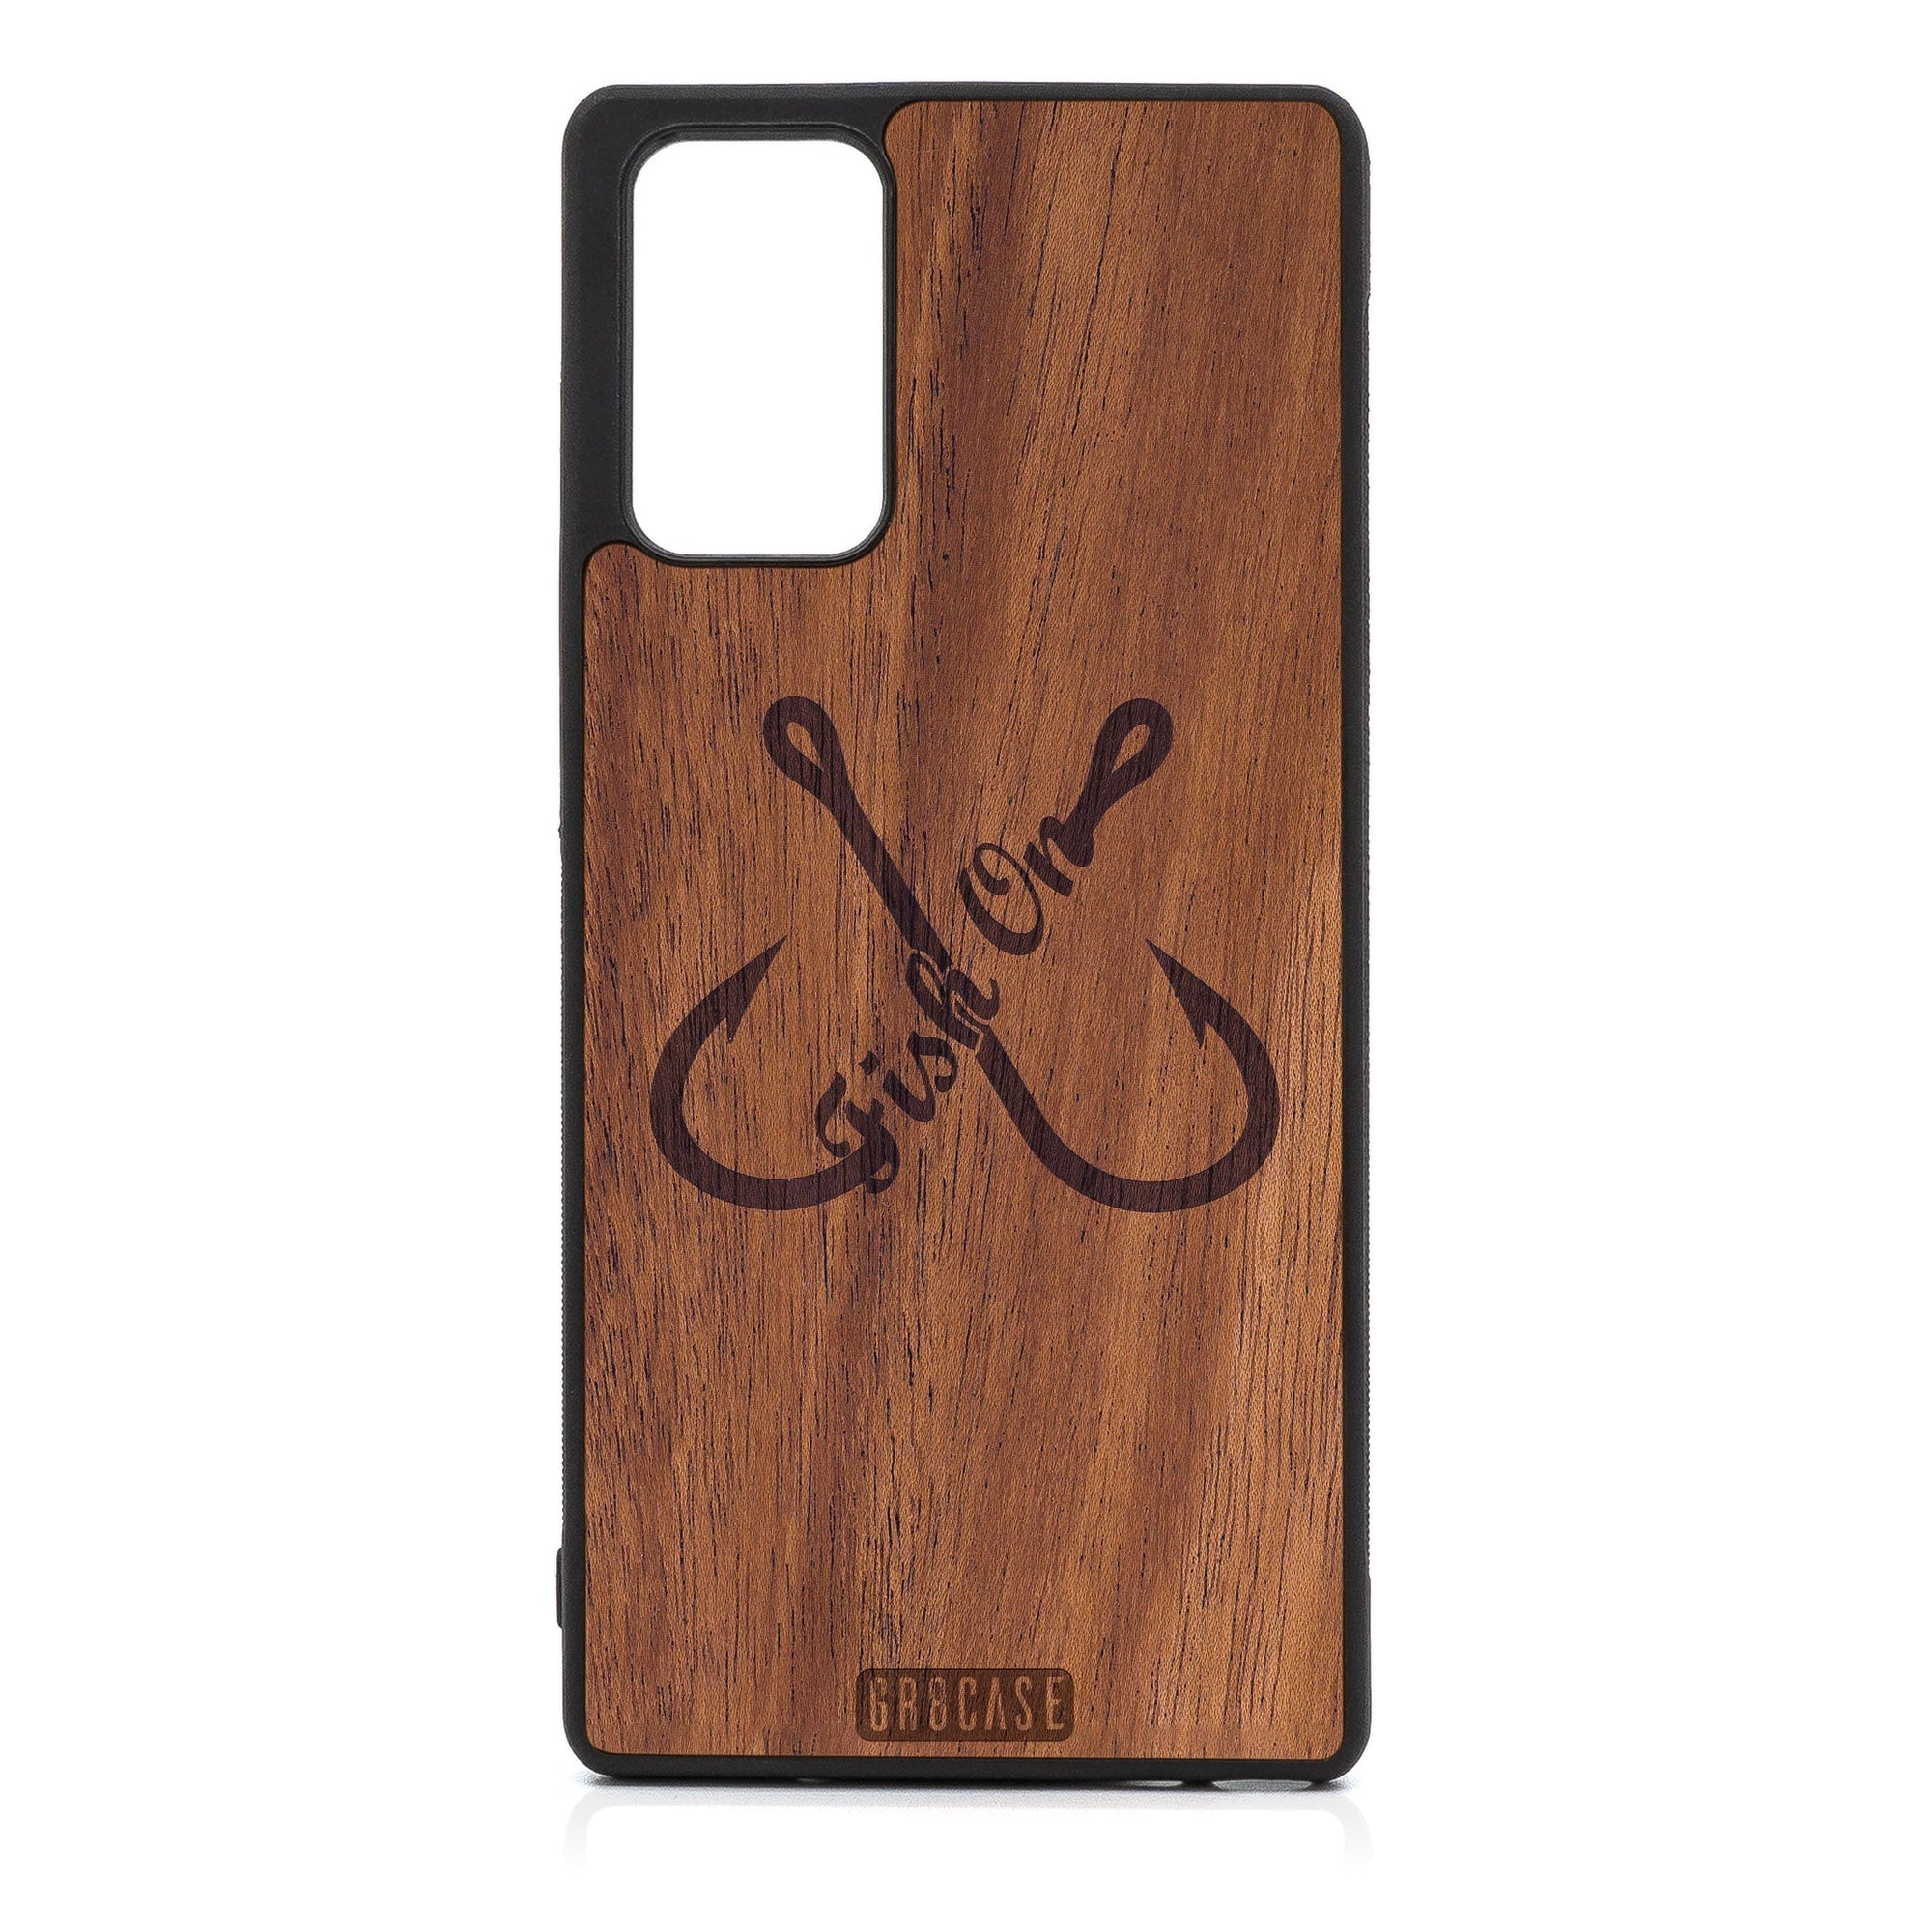 Fish On (Fish Hooks) Design Wood Case For Samsung Galaxy A52 5G